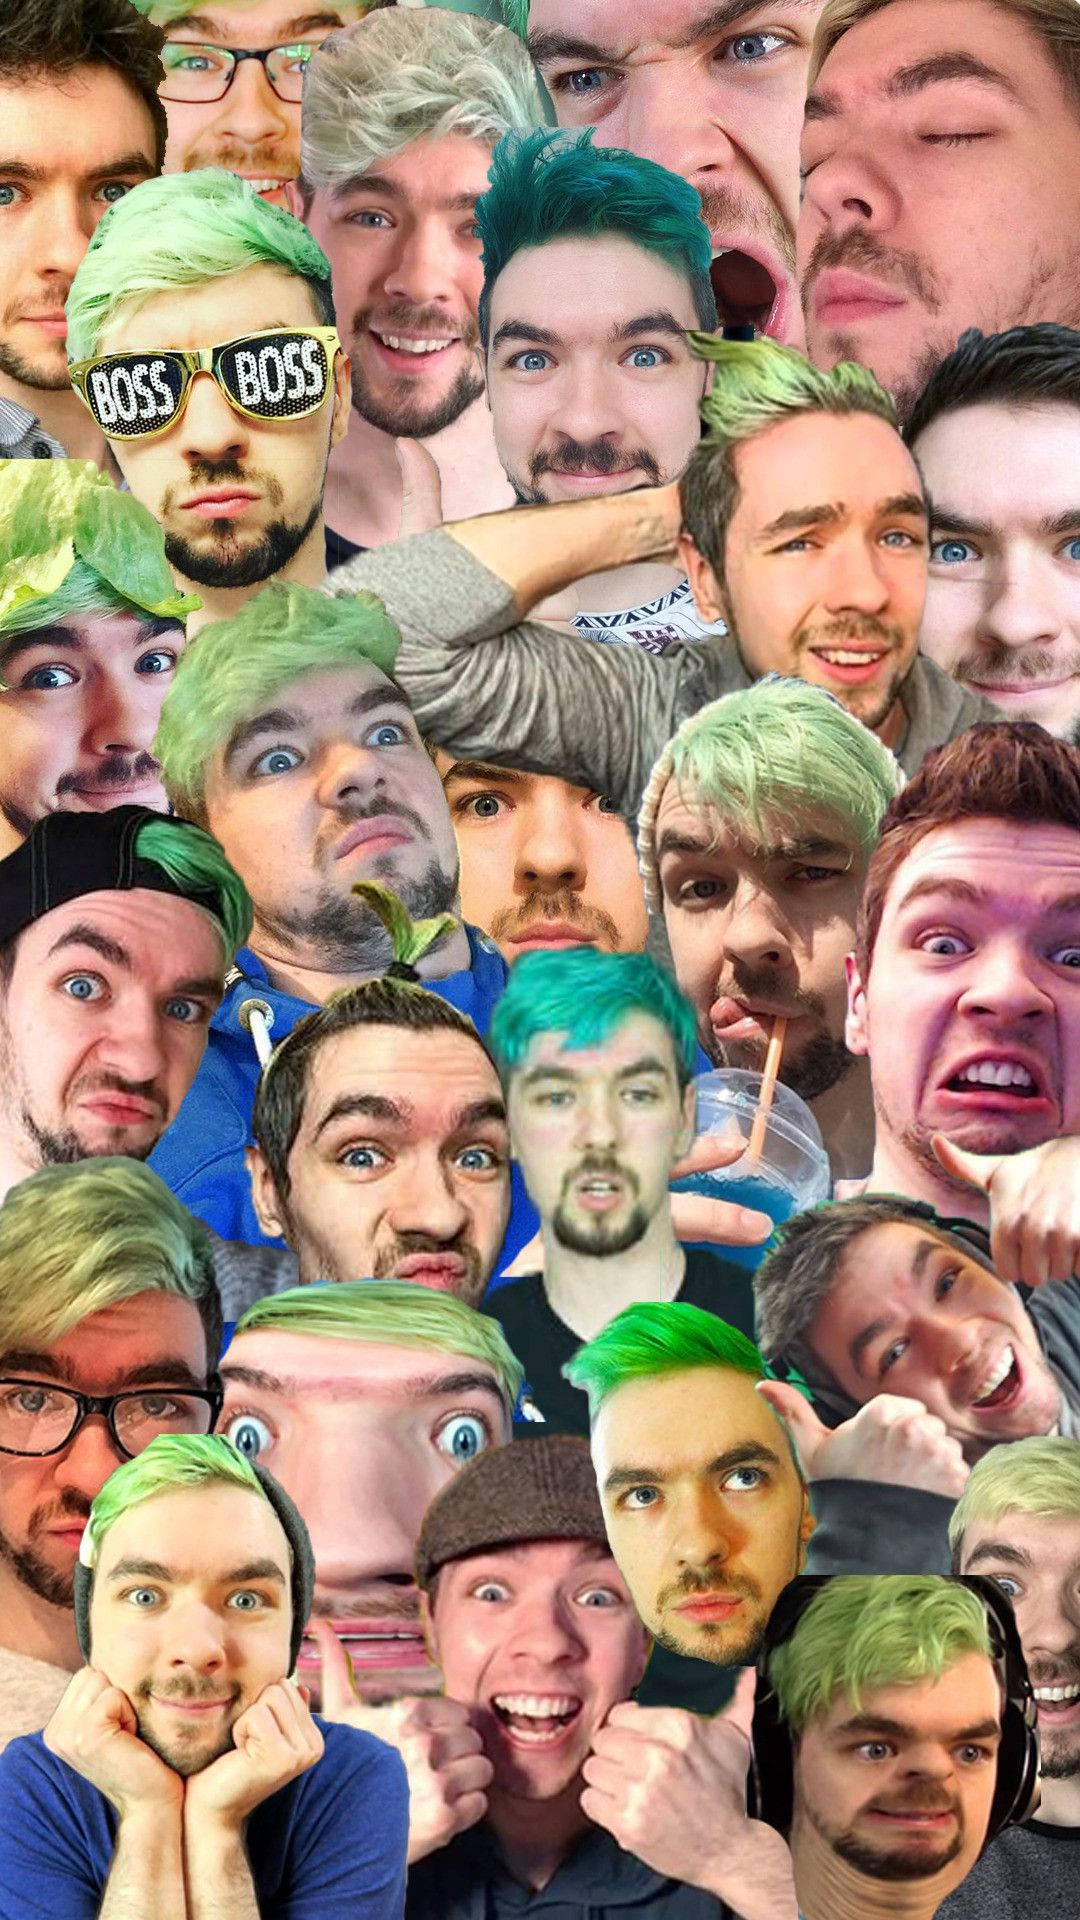 Jacksepticeyeansiktskollage. (note: If This Is Referring To A Computer Or Mobile Wallpaper, It Would Be 